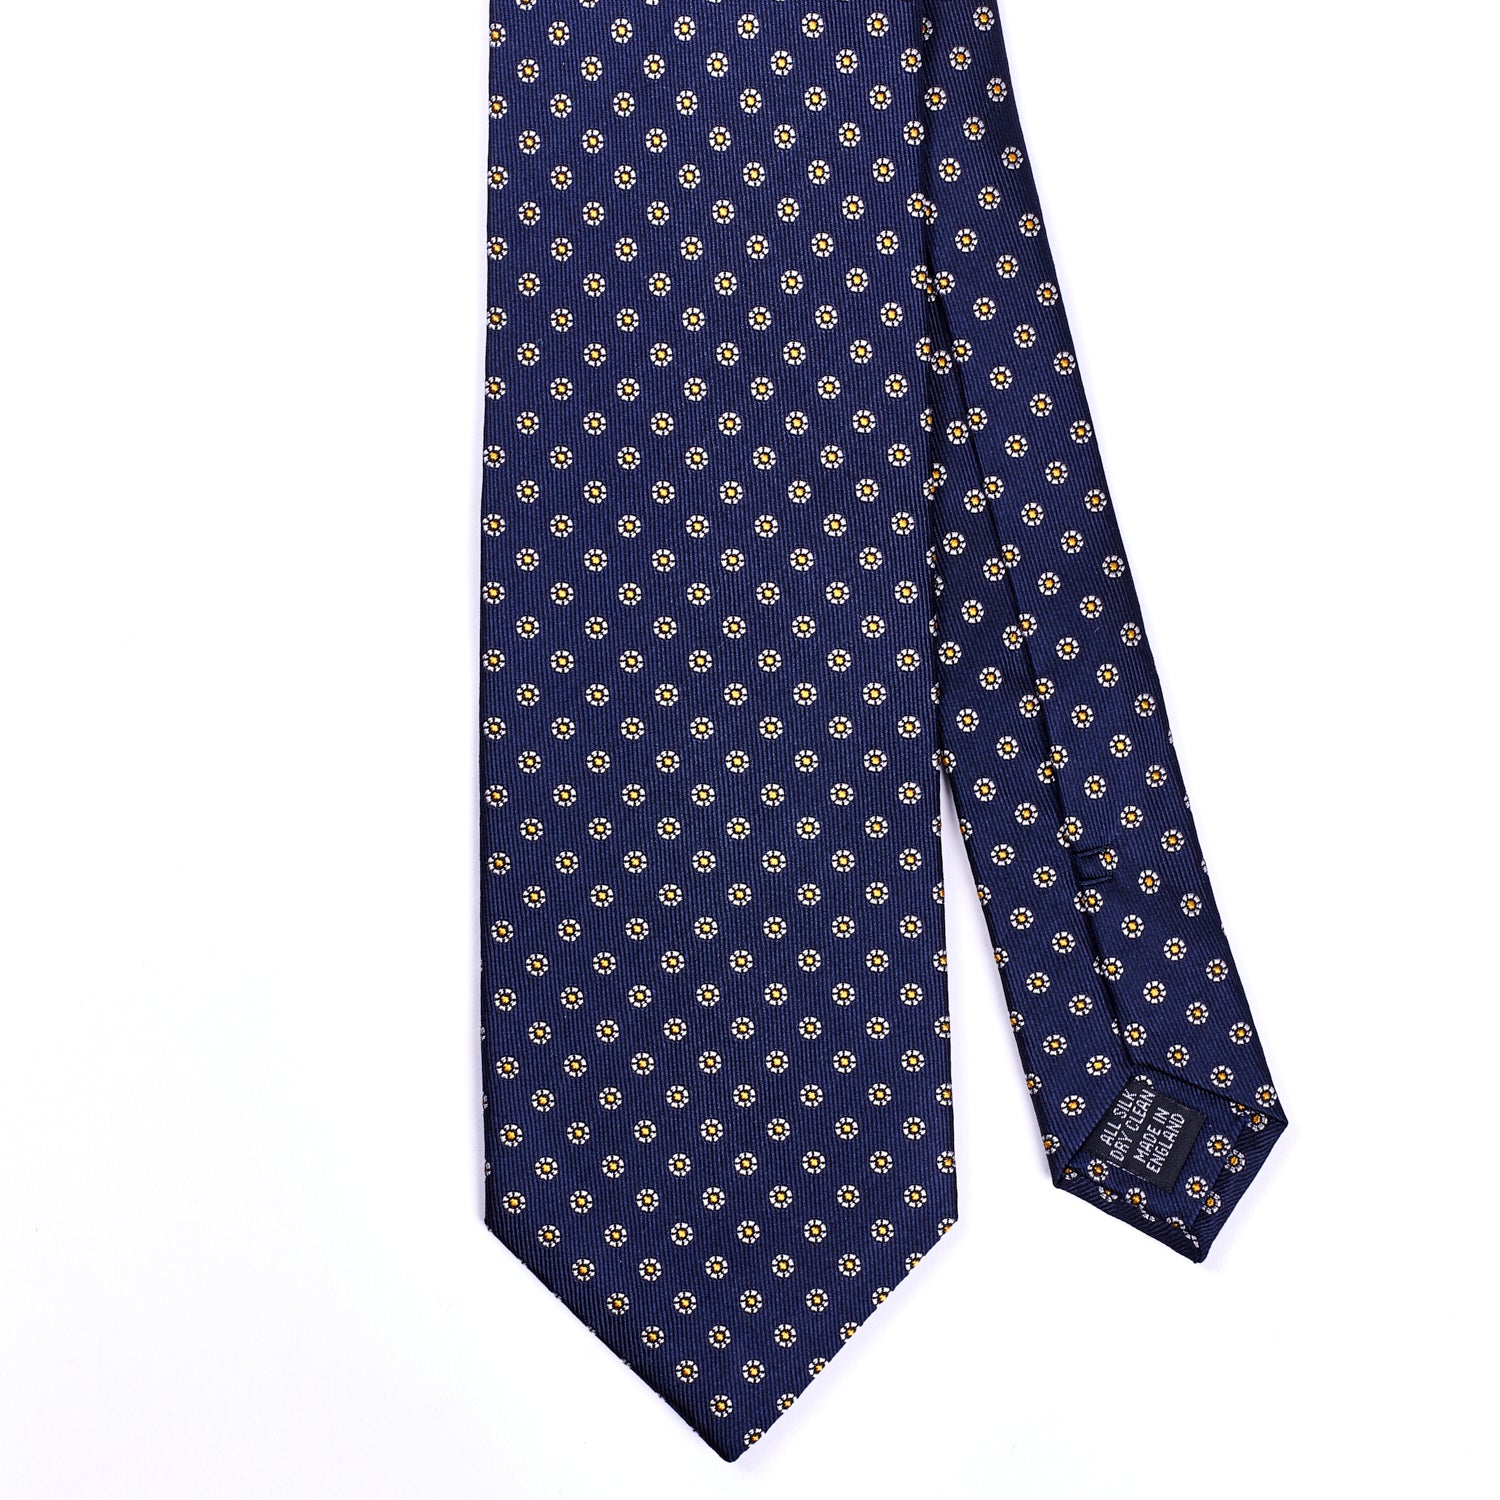 A Sovereign Grade Midnight Navy Floral Jacquard Tie, 150 cm from KirbyAllison.com on a white background.